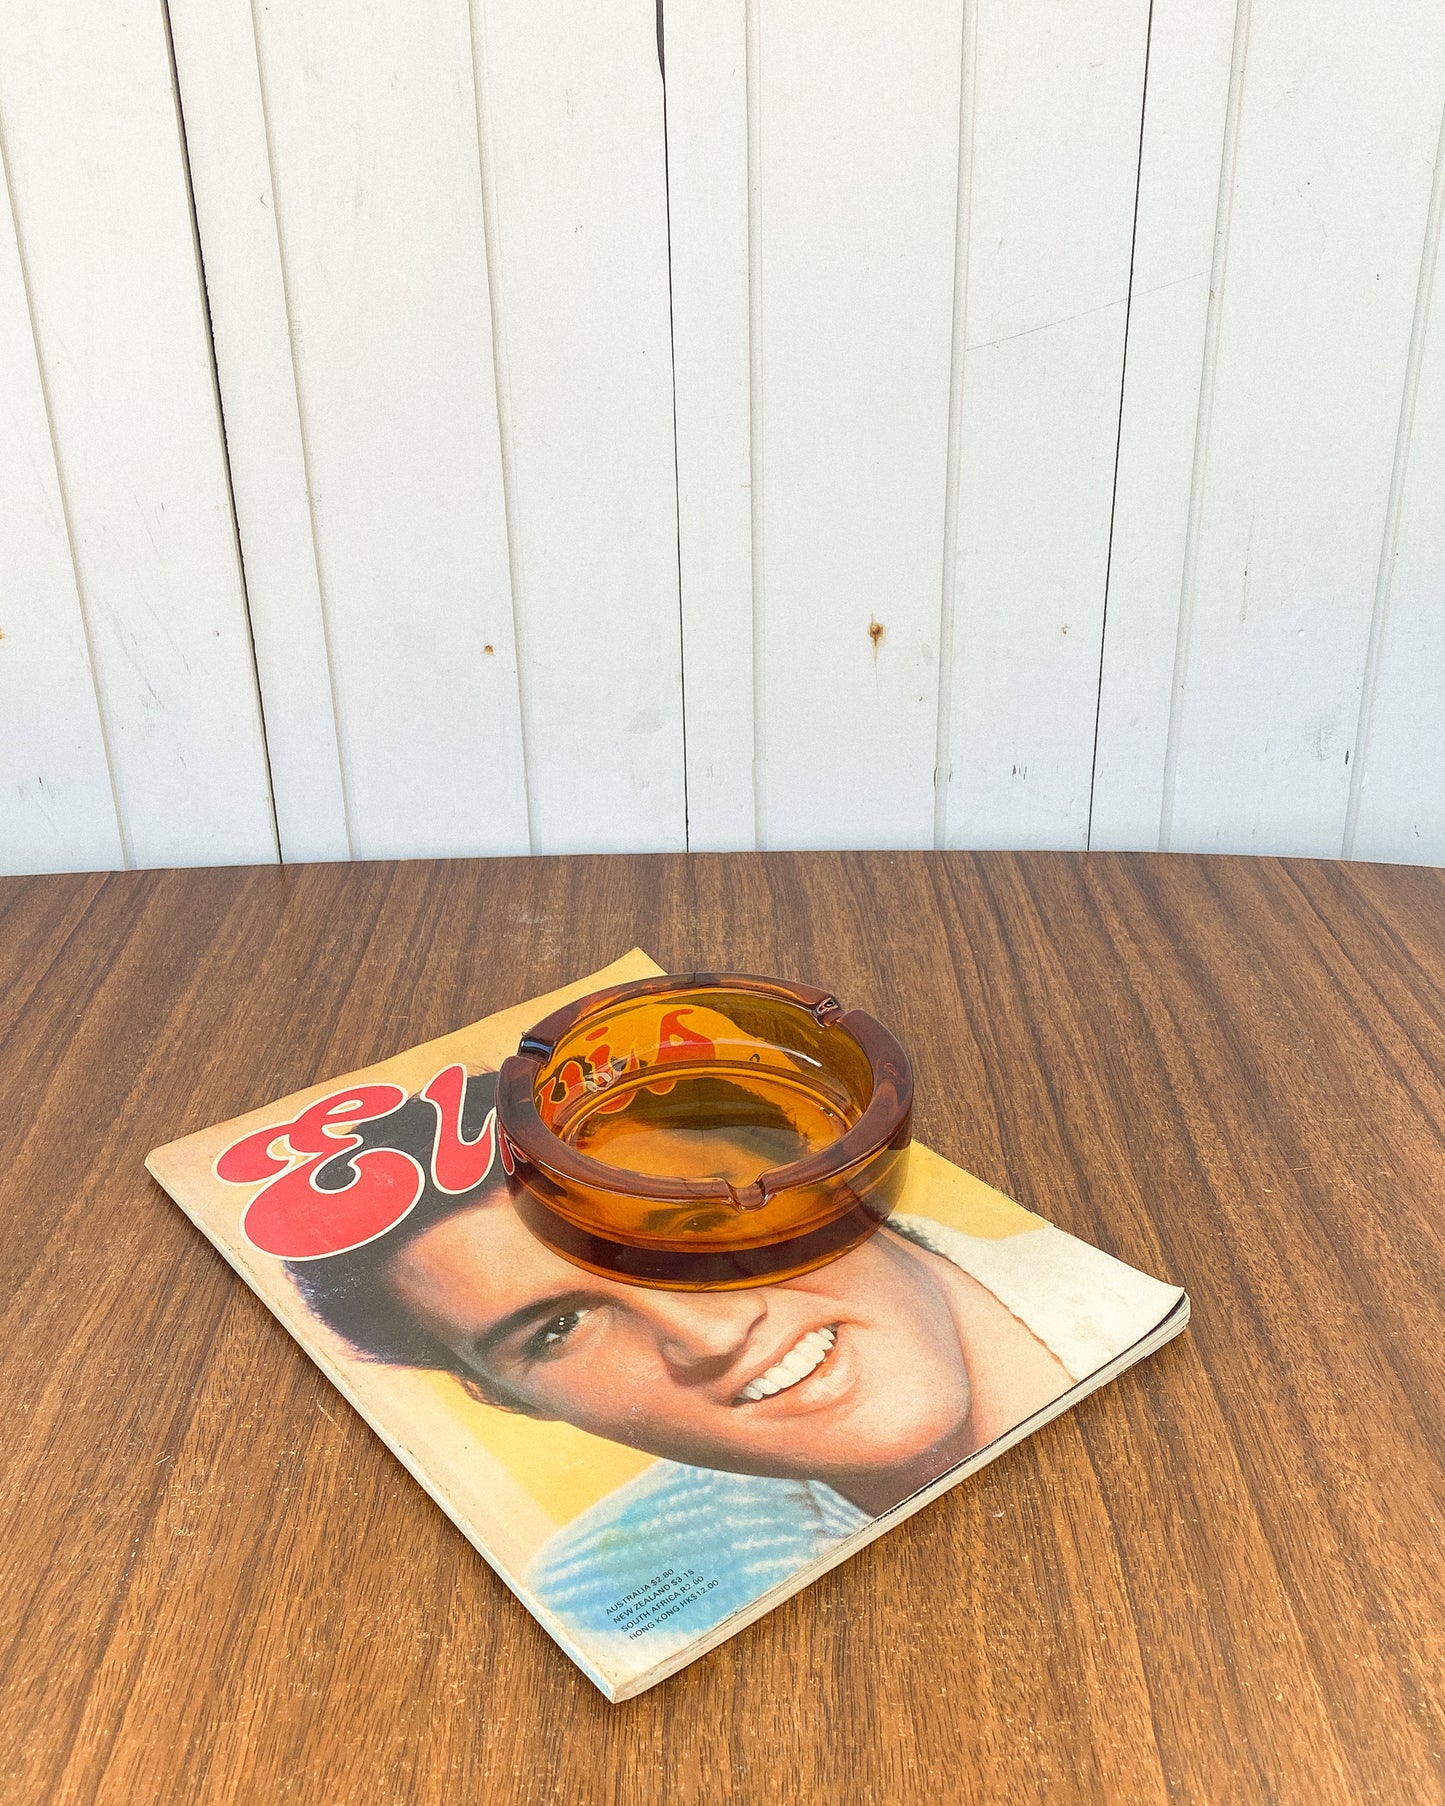 Vintage Amber Glass Ashtray | Made in Italy